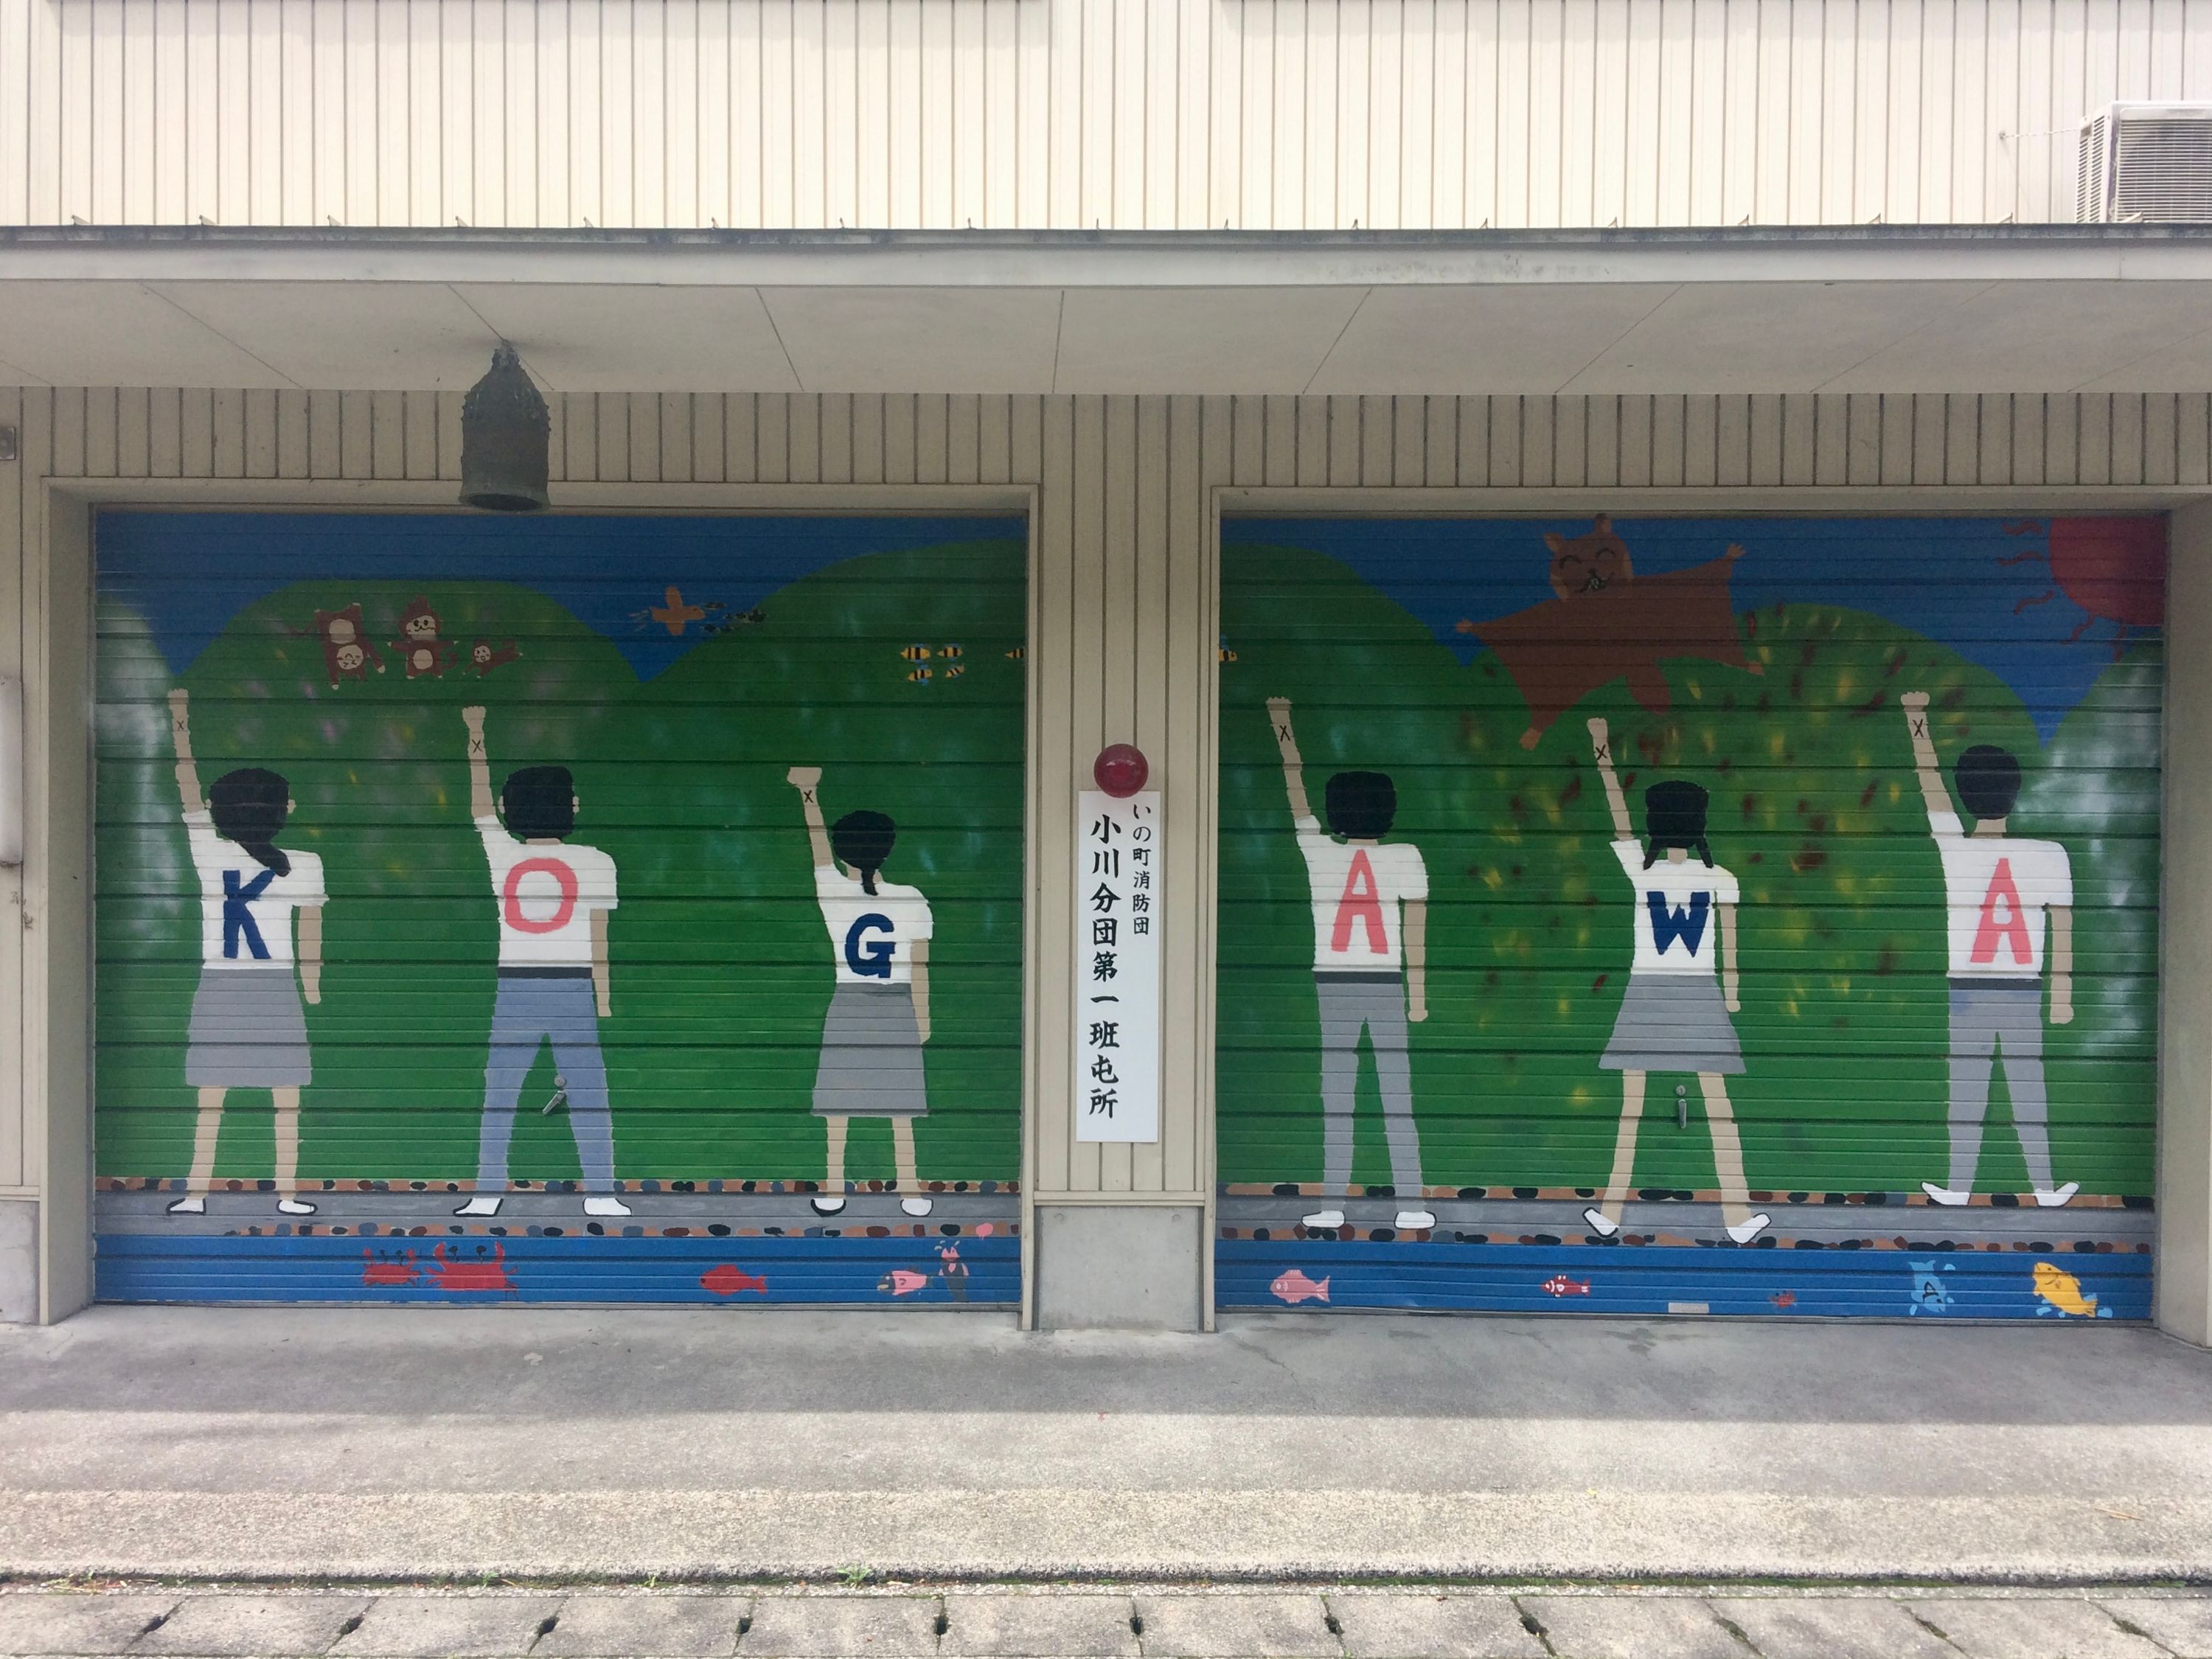 A giant flying squirrel makes a low pass over six children on a garage door mural, their left arms raised to the sky with clenched fists, the backs of their white shirts spelling “KOGAWA”.